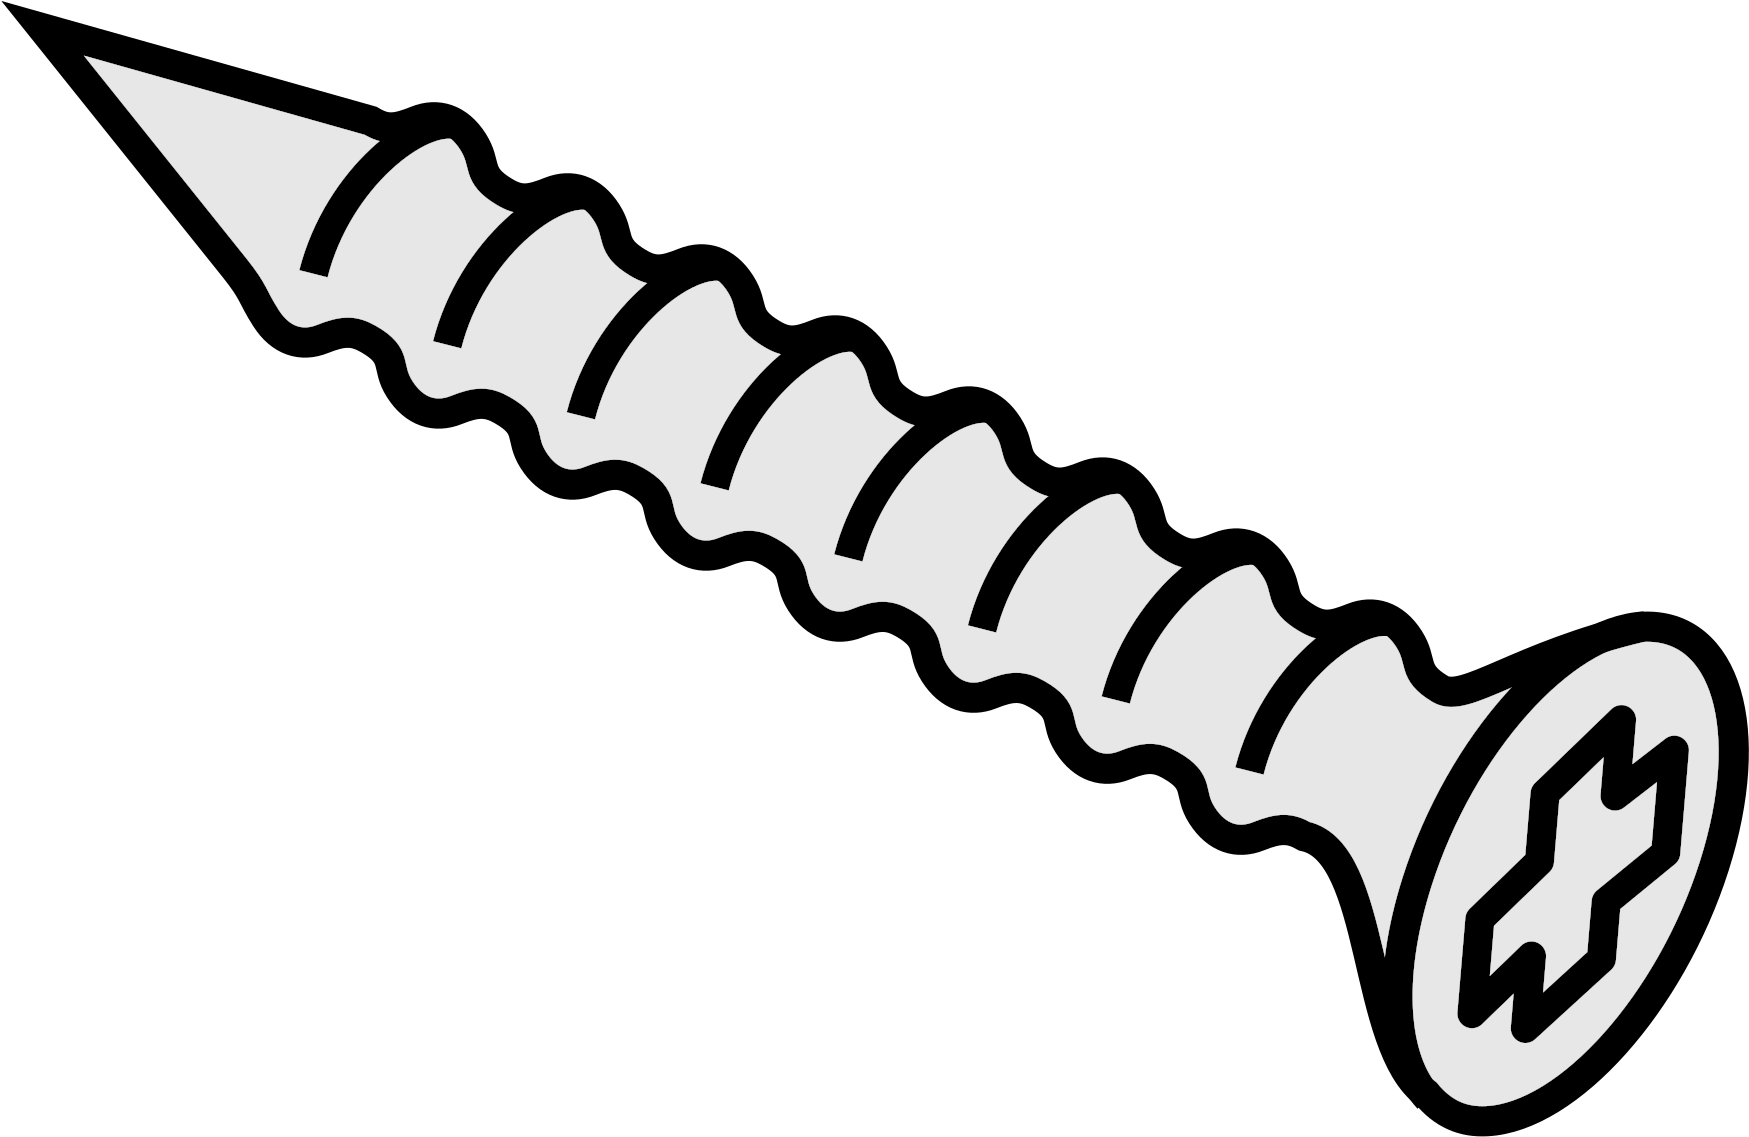 Screws Clipart Black And White - Clipart Image Of Screw (2400x2400)